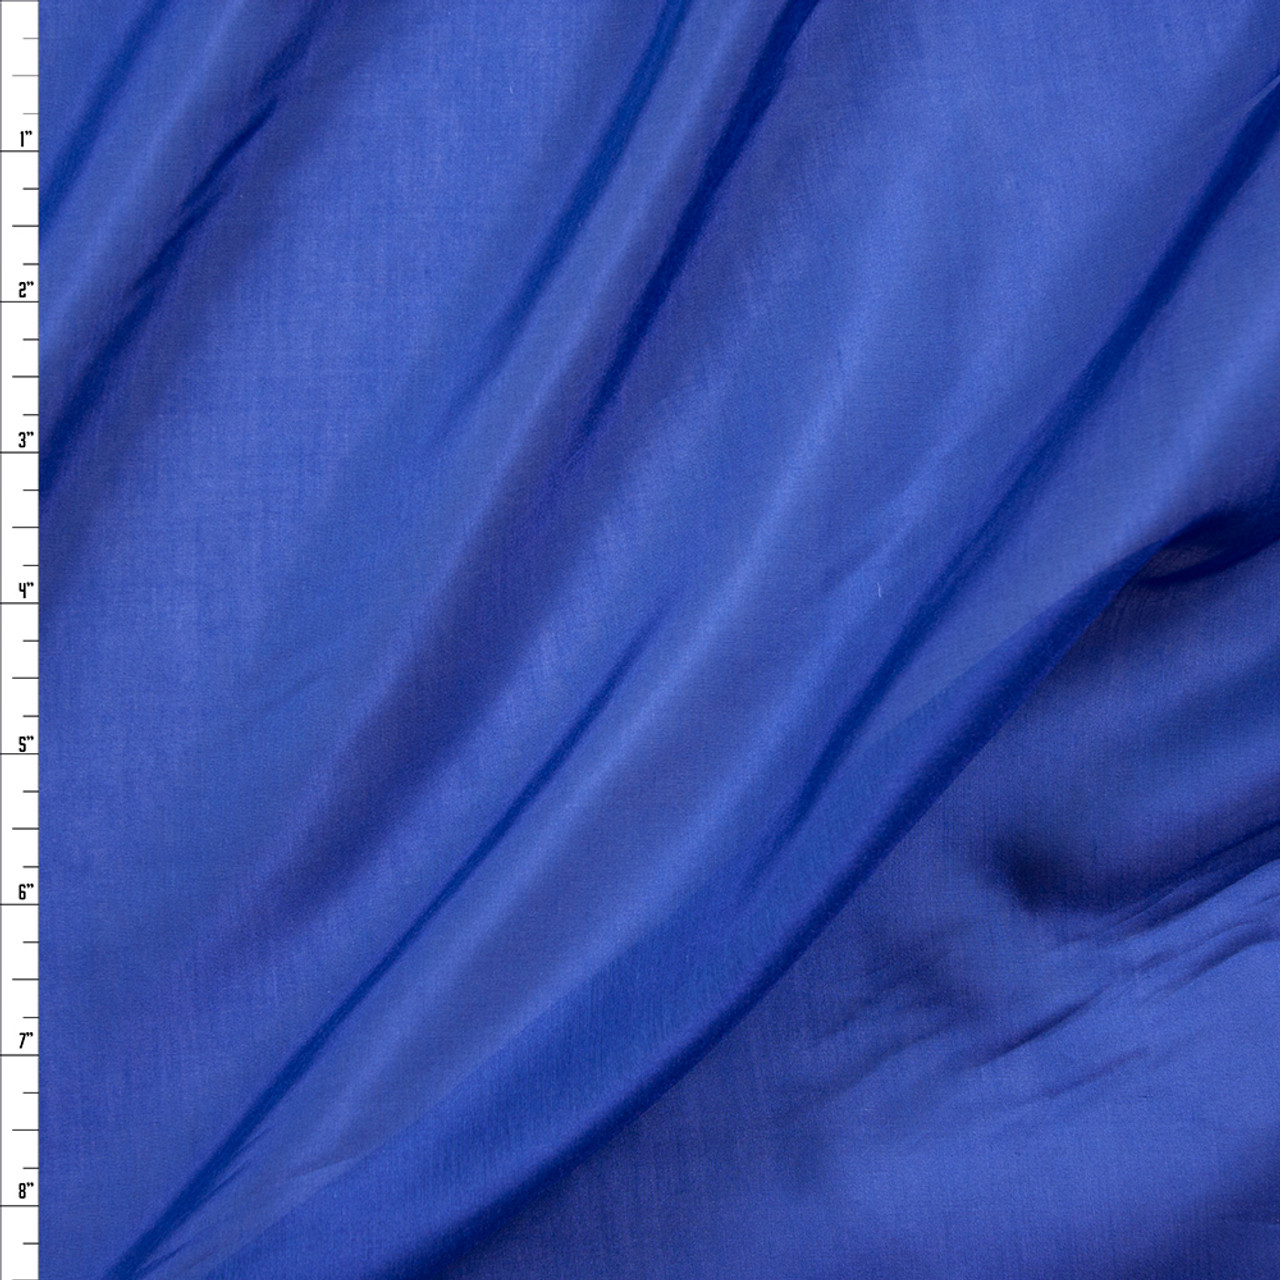 Cali Fabrics Blue Cotton/Silk Voile Fabric by the Yard